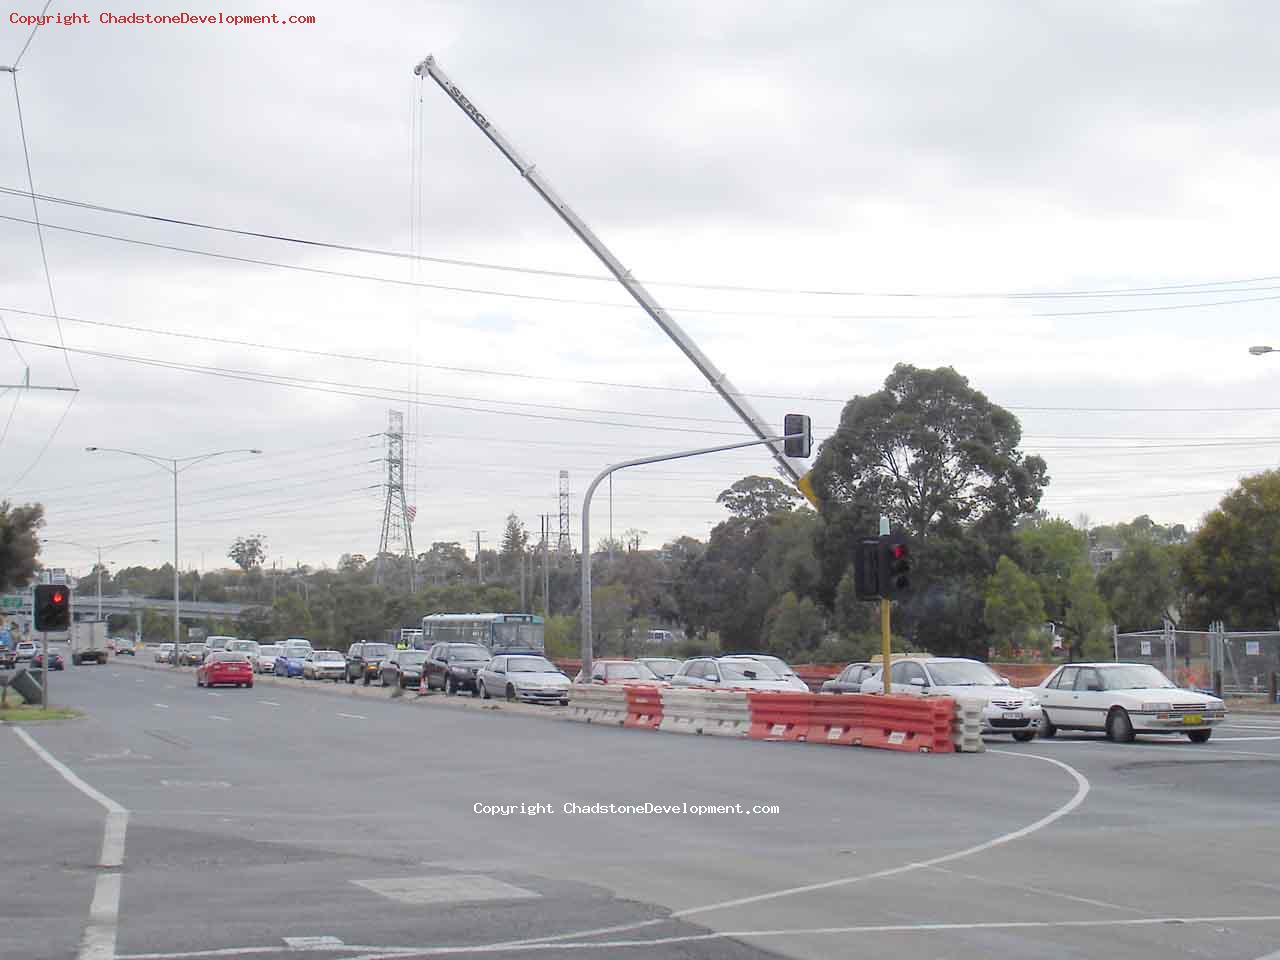 A crane lifts concrete on warrigal rd - Chadstone Development Discussions